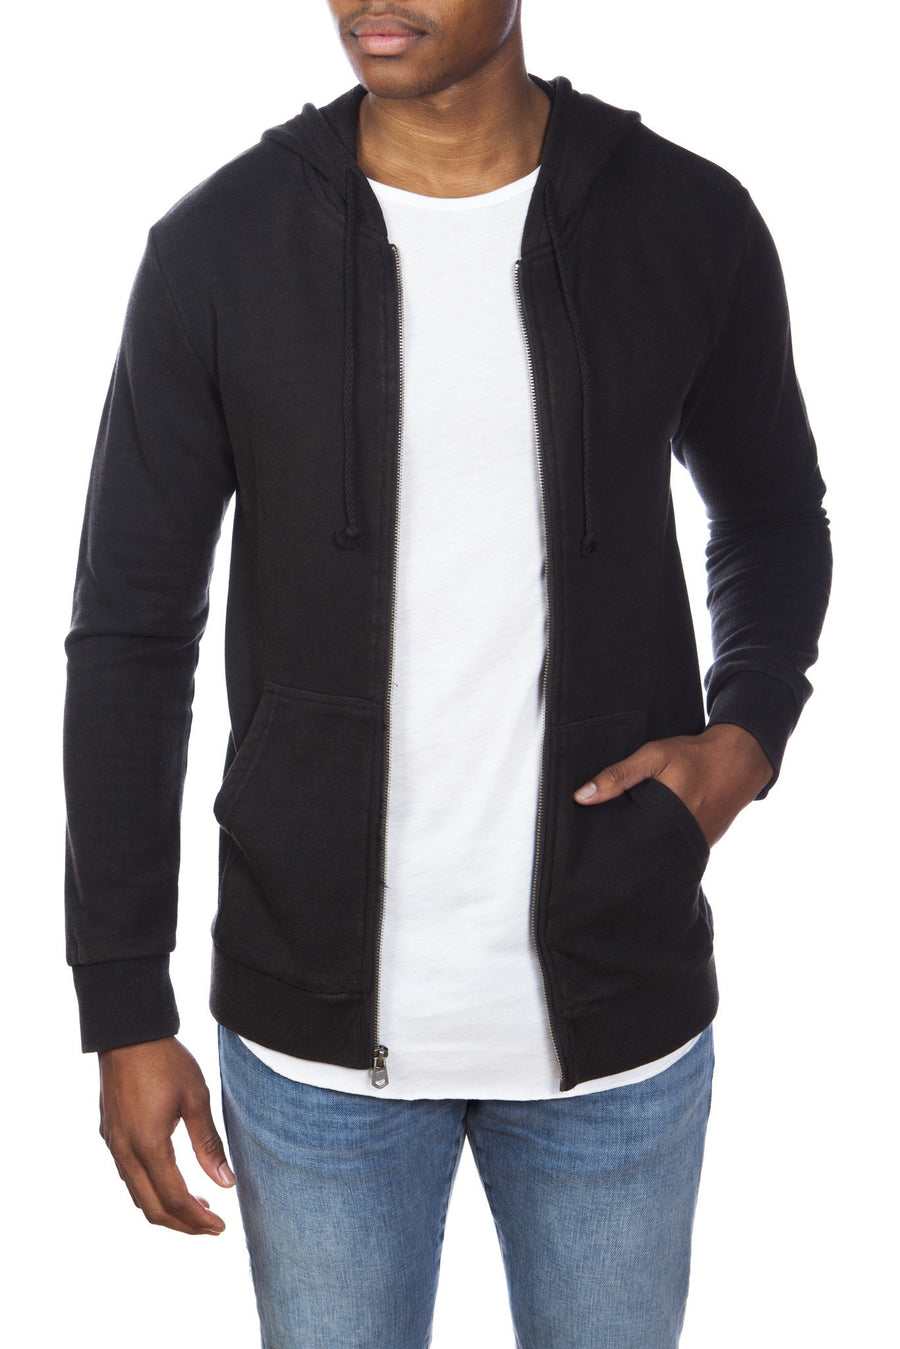 Stone Washed Cotton/Modal French Terry Zip-Up Hoodie